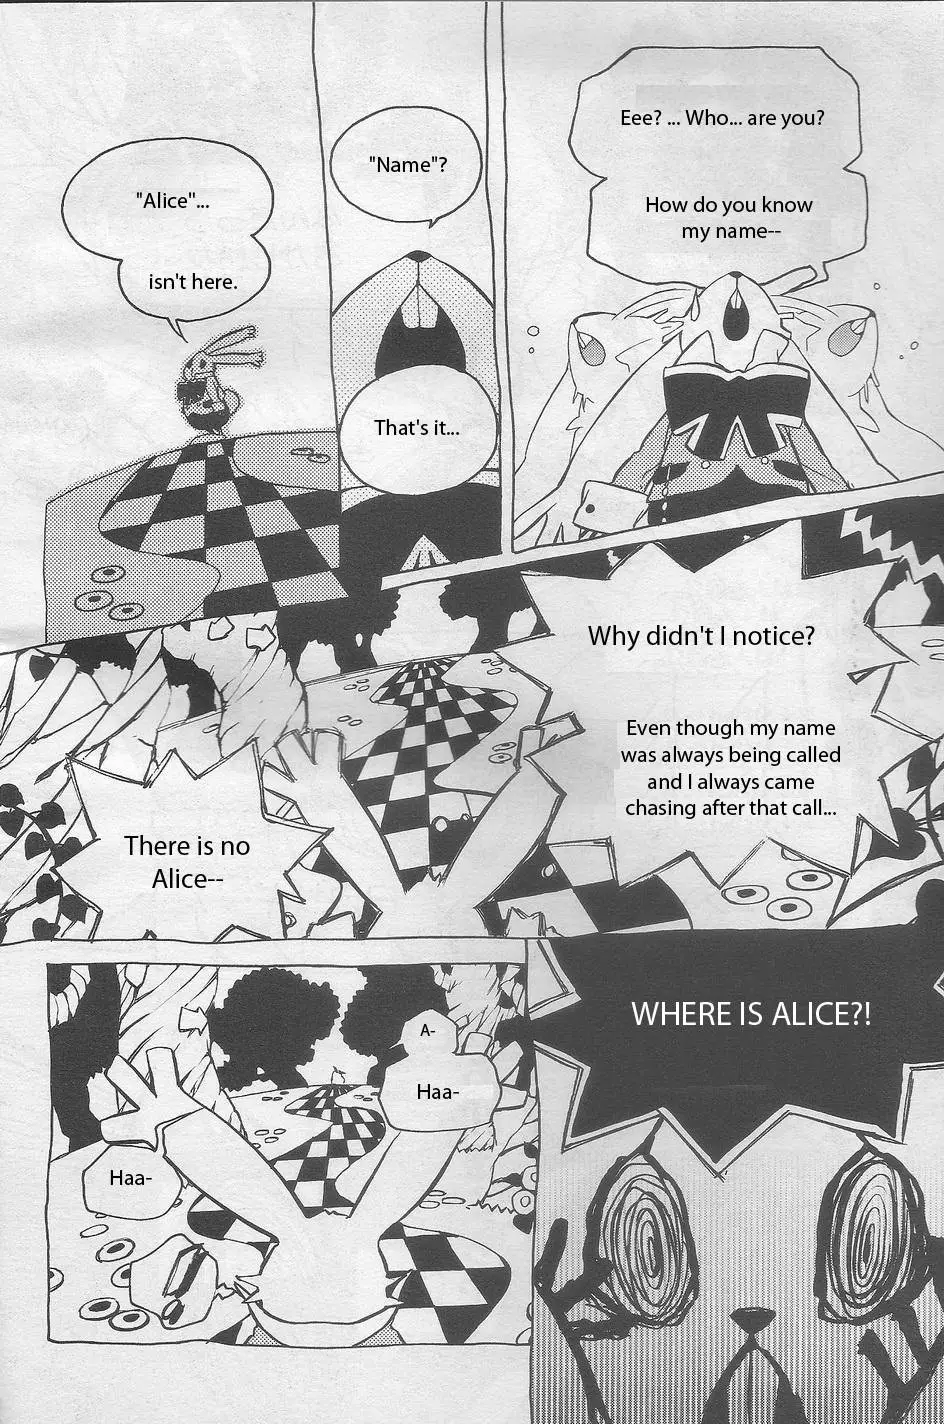 Are You Alice? - 16 page p_00007